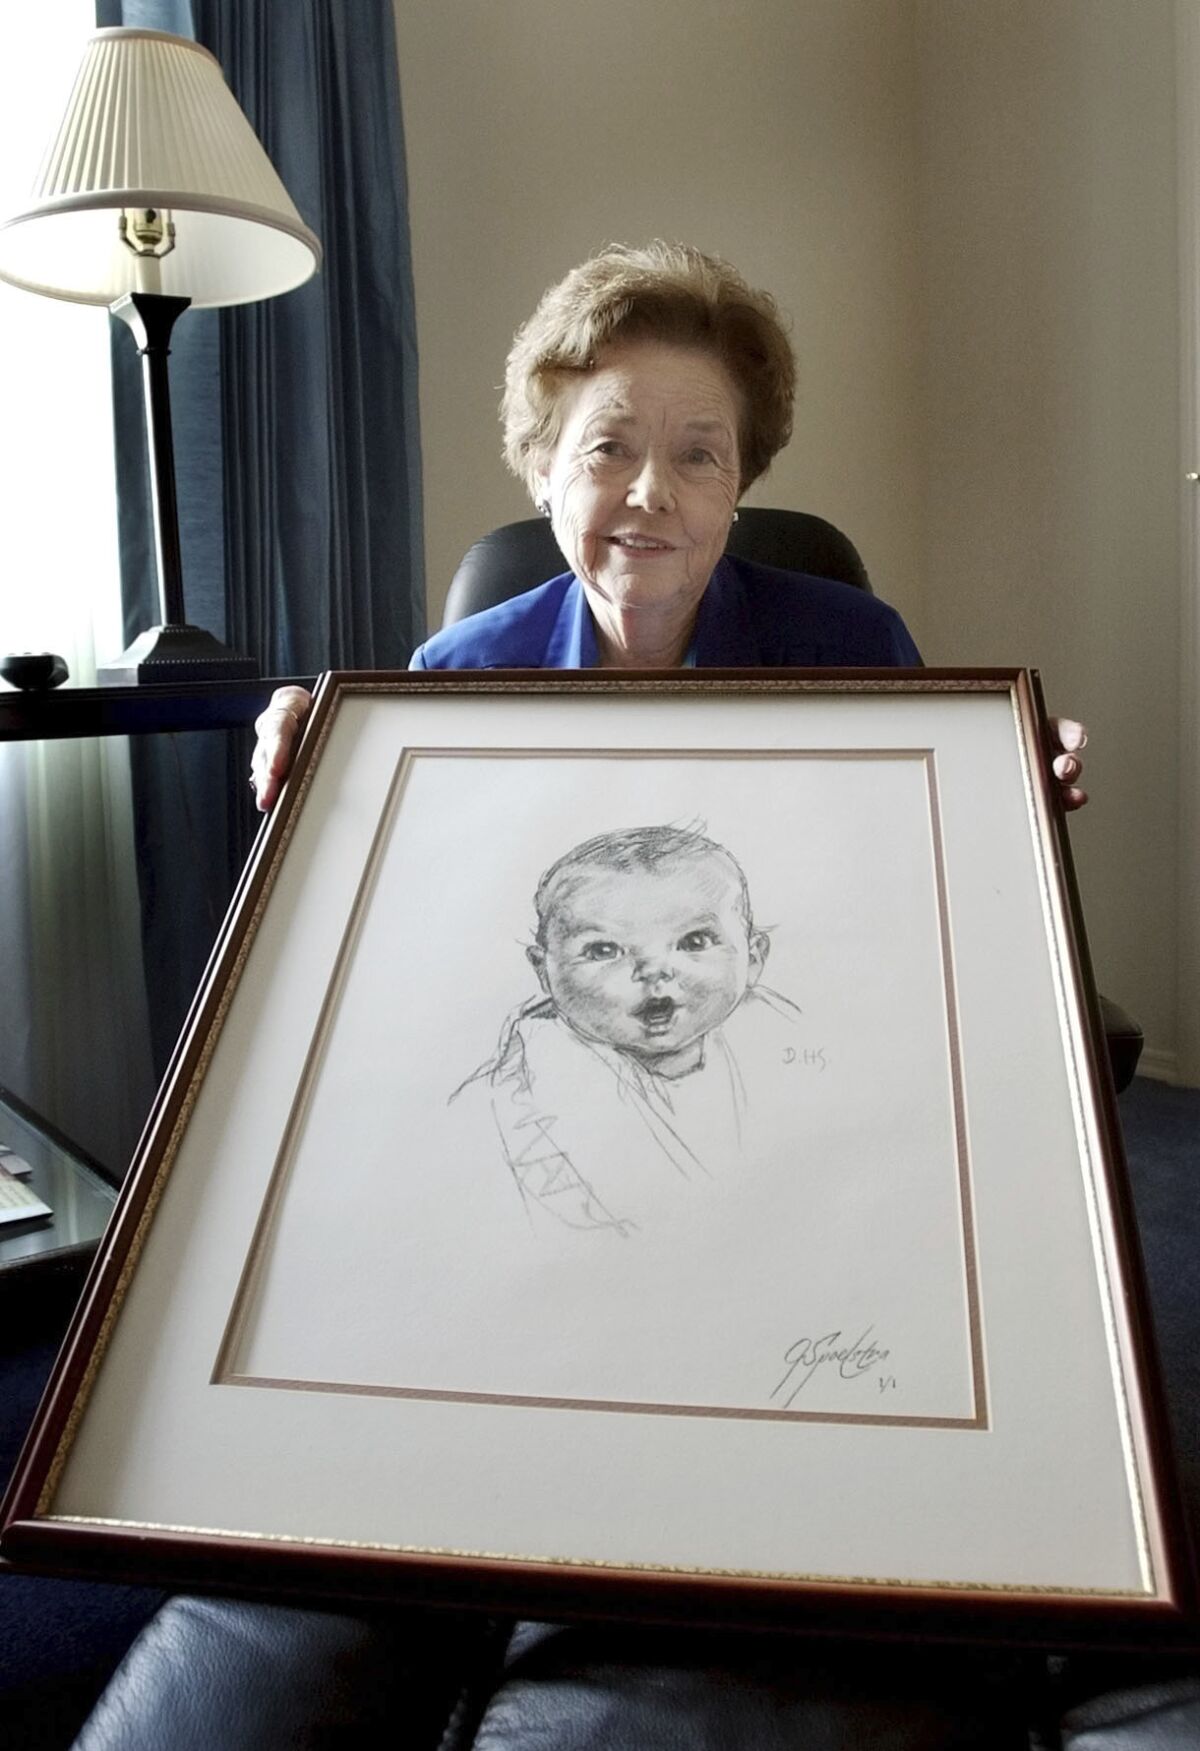 FILE - Ann Taylor Cook, poses at her Tampa, Fla., home Wednesday afternoon Feb. 4, 2004, with a copy of her photo that is used on all Gerber baby food products. Ann Turner Cook, whose cherubic baby face was known the world over as the original Gerber baby, has died. She was 95. Gerber announced Cook's passing in an Instagram post on Friday, June 3, 2022. (AP Photo/Chris O'Meara, File)